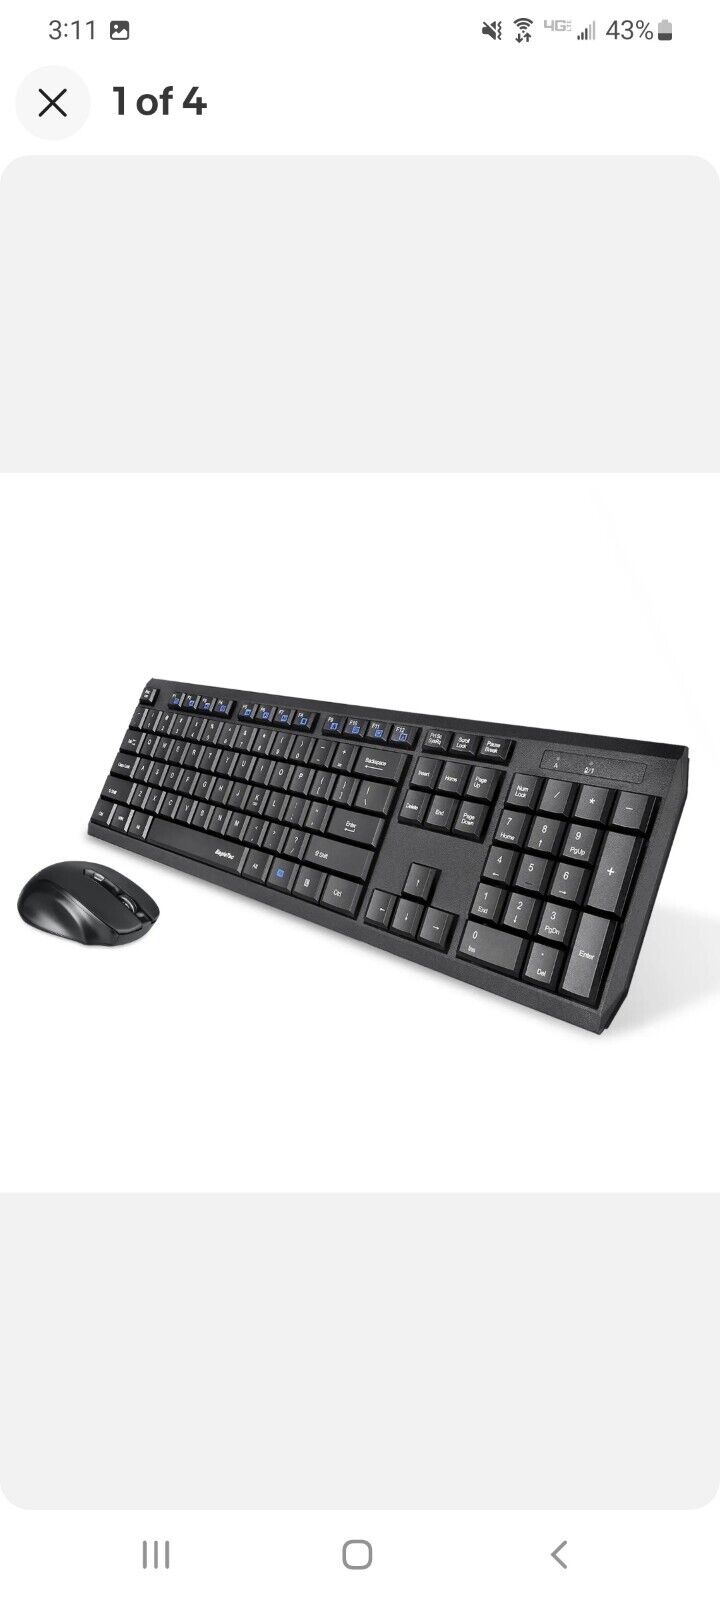 Eagletec K104 Wireless 104 Keys Keyboard and Mouse Combo for Windows PC